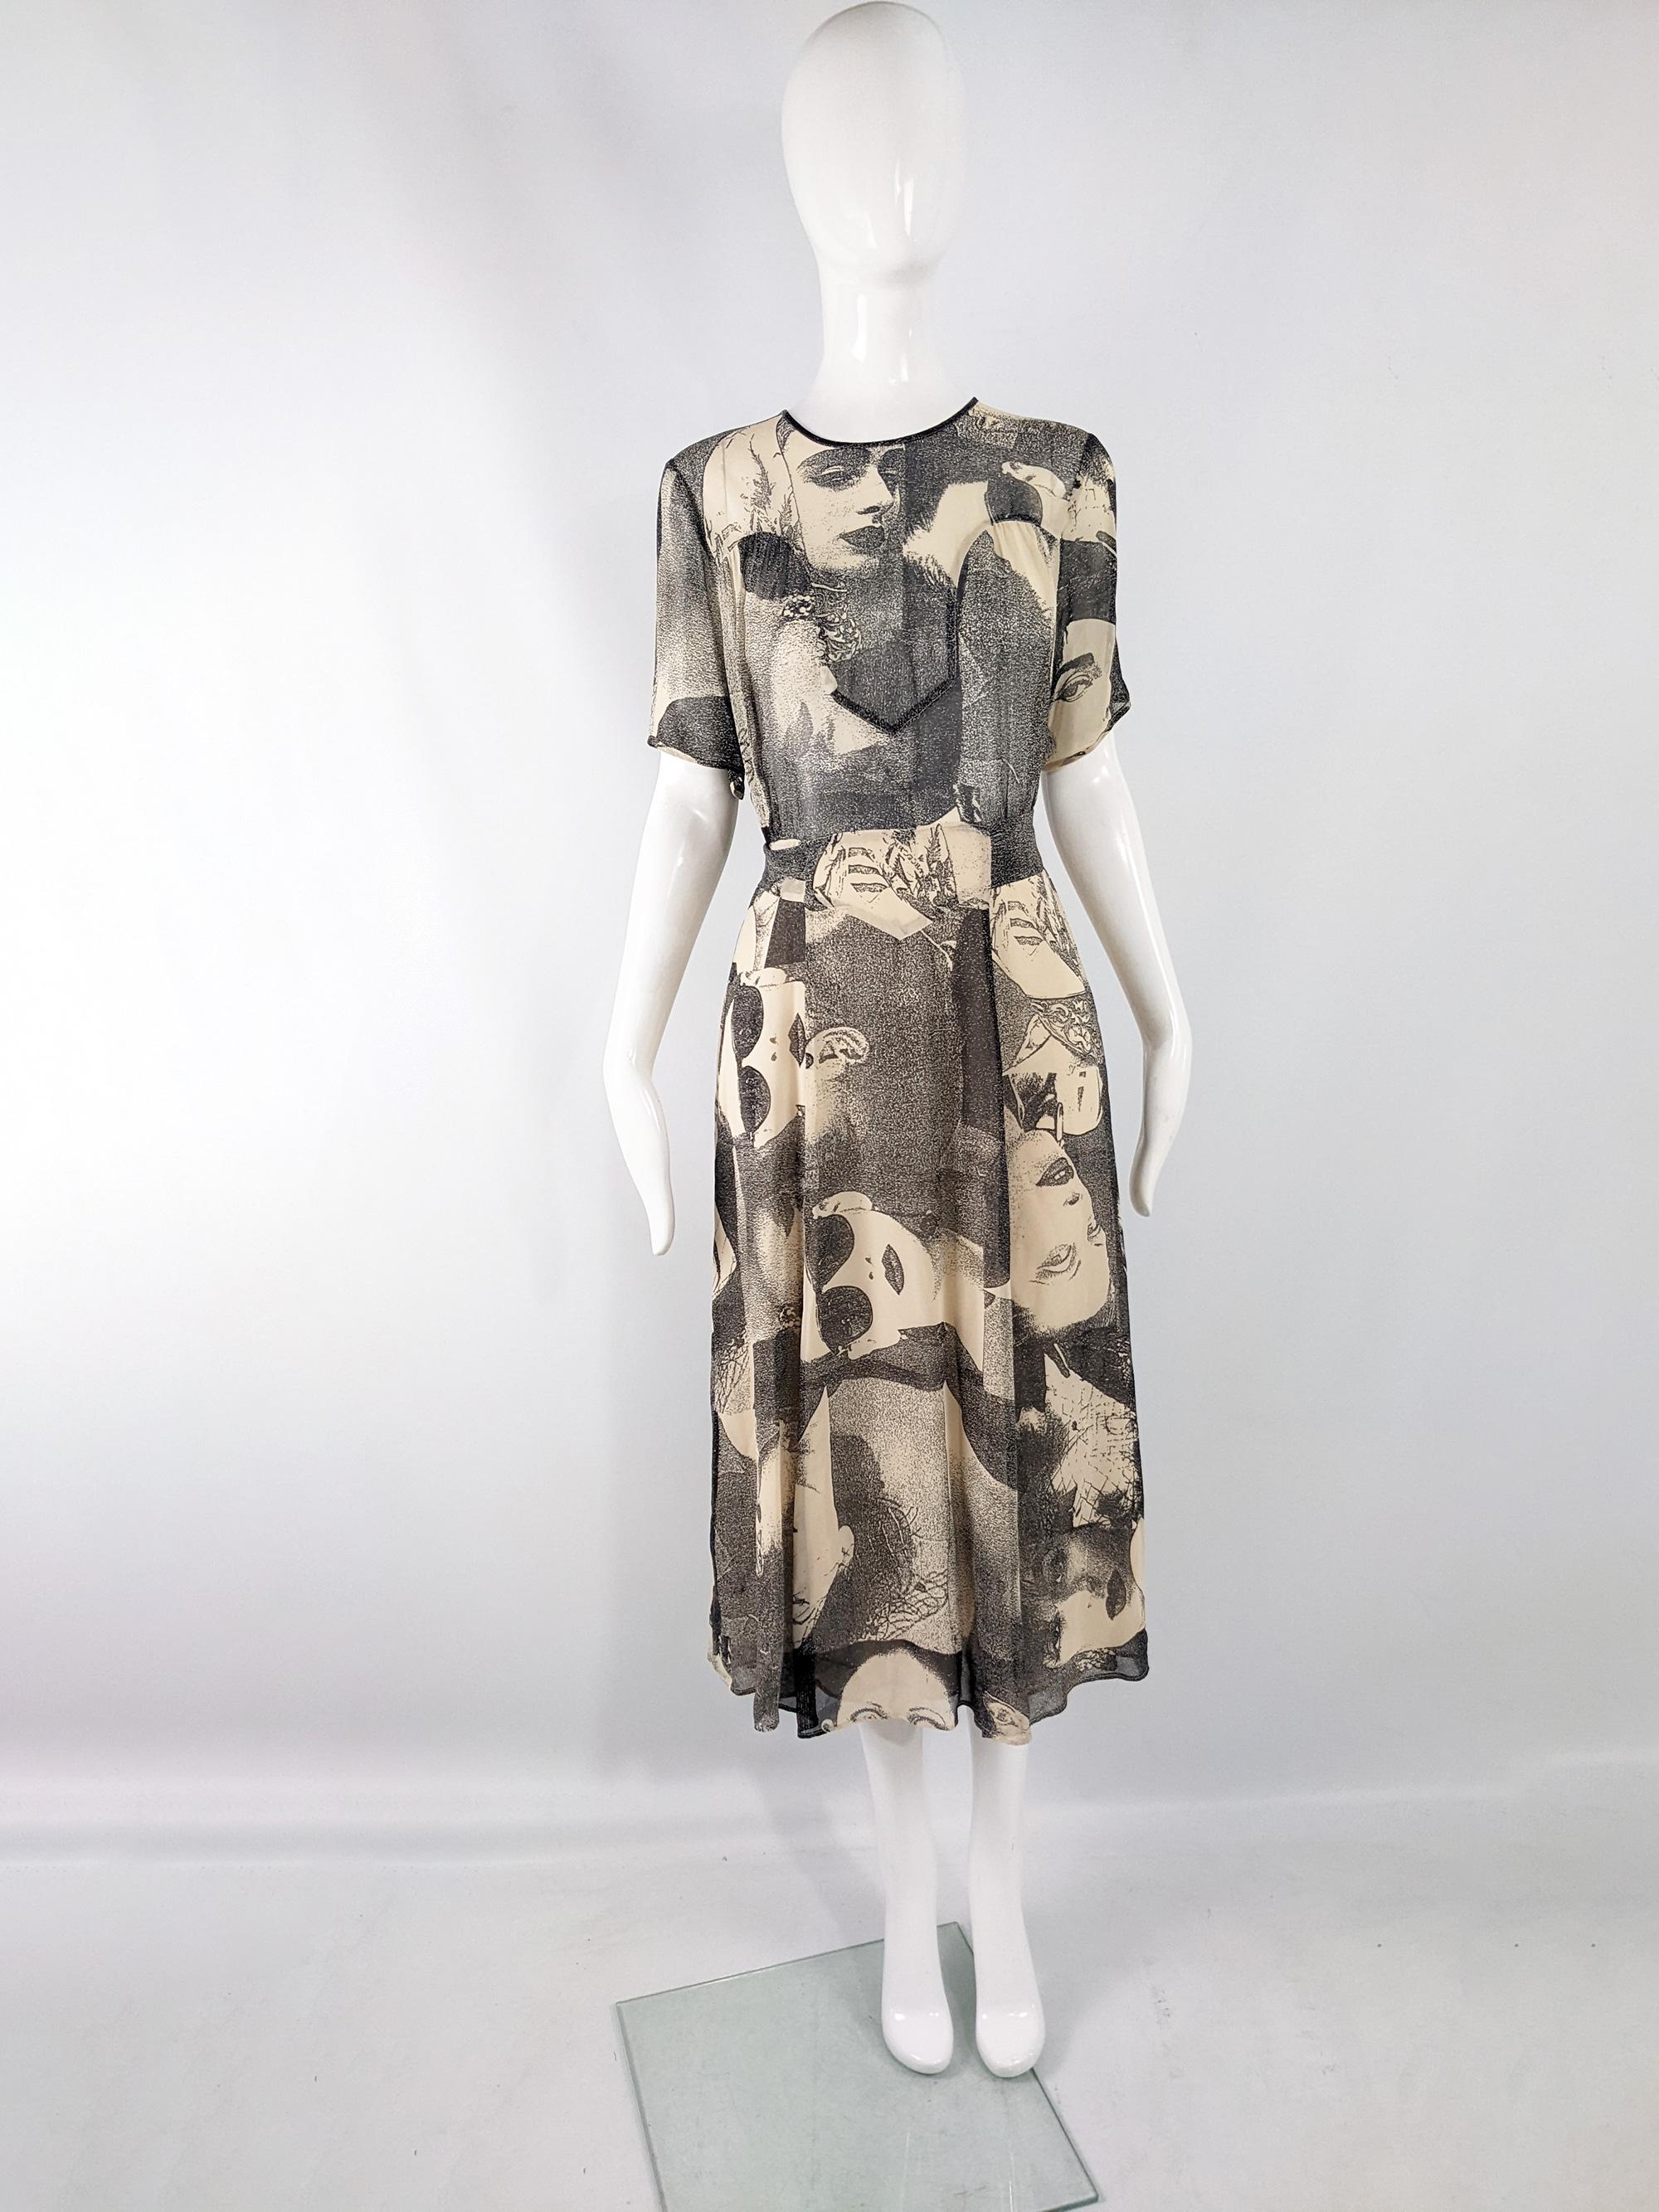 An excellent and rare vintage dress from the 90s by luxury Italian fashion house, Moschino. In a cream and grey georgette fabric that is sheer on the bodice and has amazing art deco style faces of glamorous women printed throughout. It has a classic